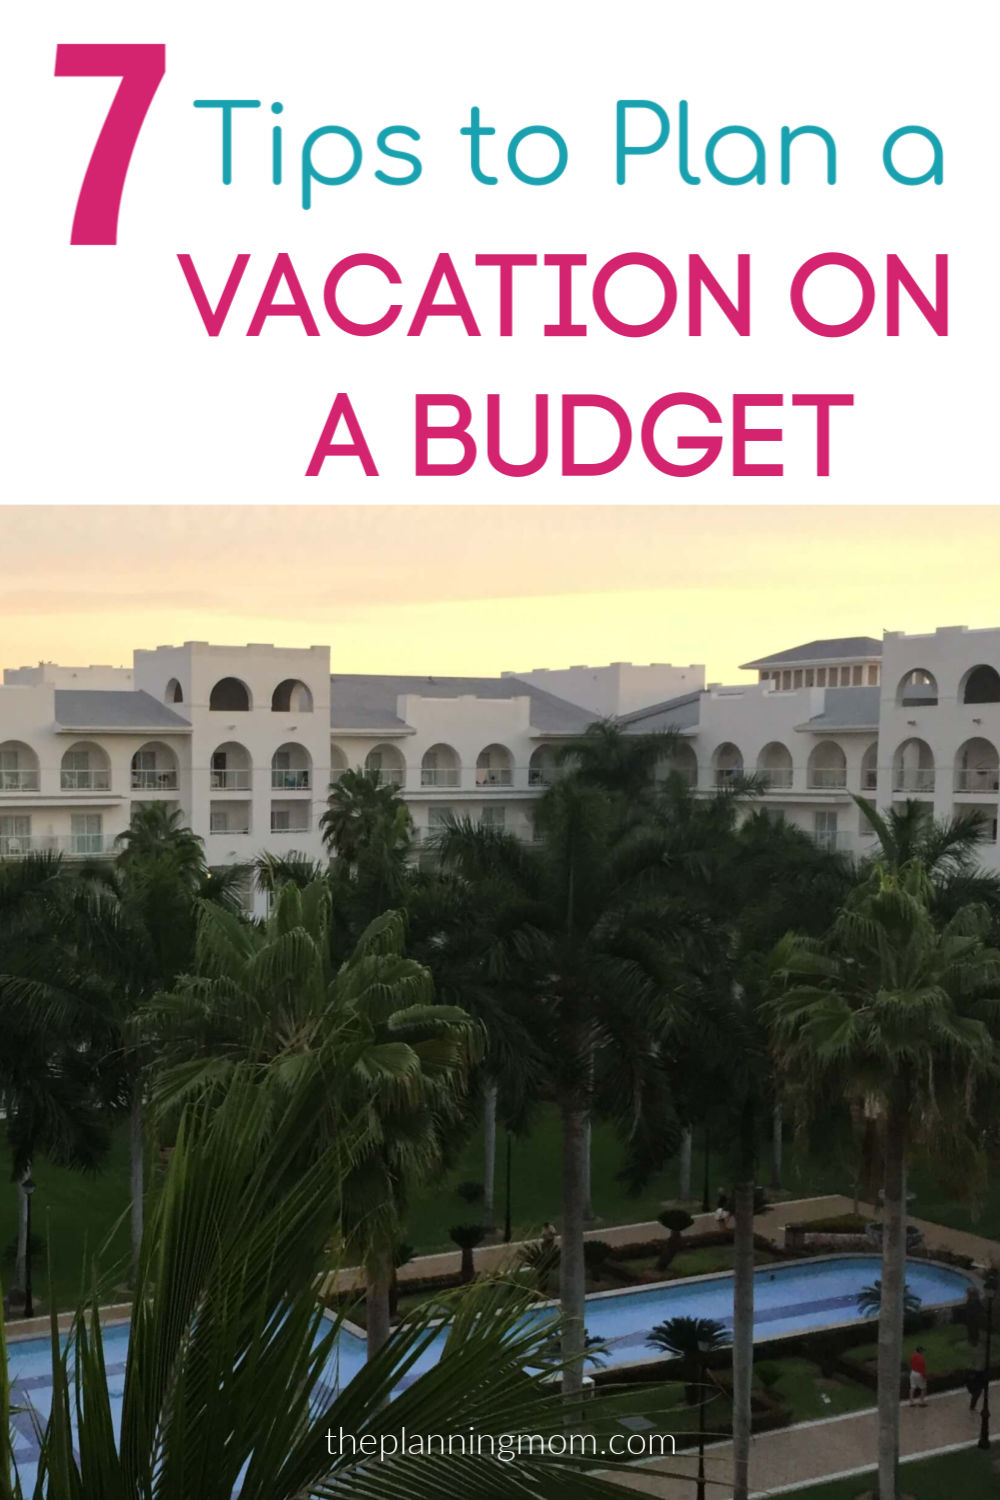 13 Tips to Plan a Vacation On a Budget - The Planning Mom